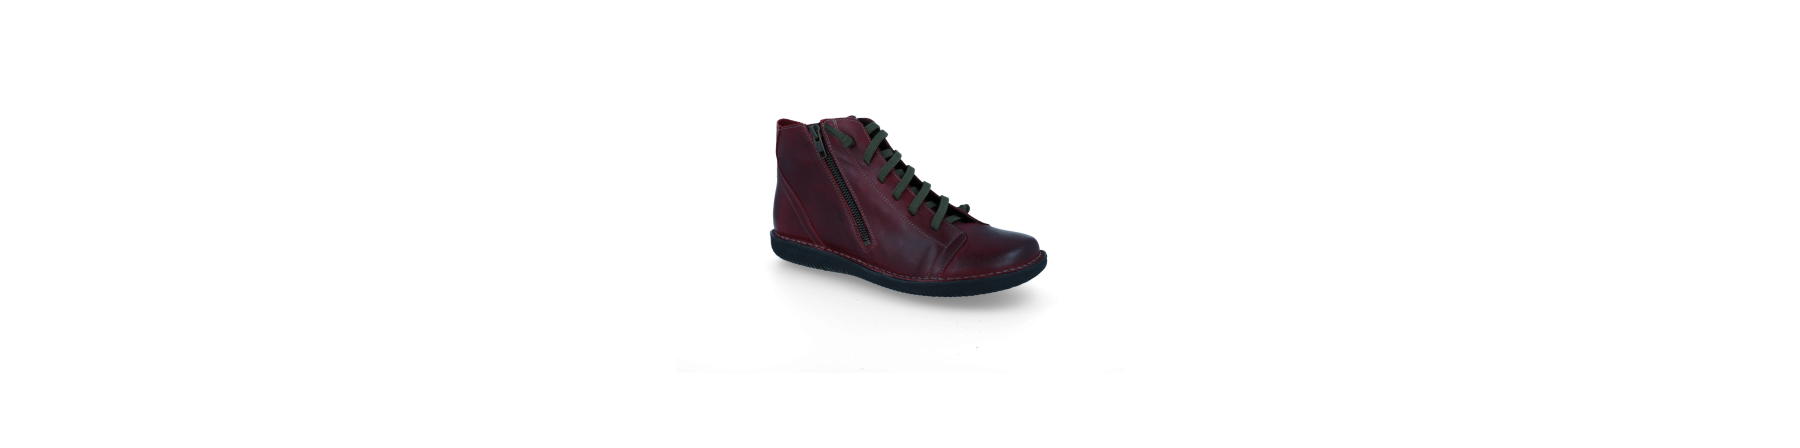 BOTINES CONFORT MUJER MOD. MOUNTAIN